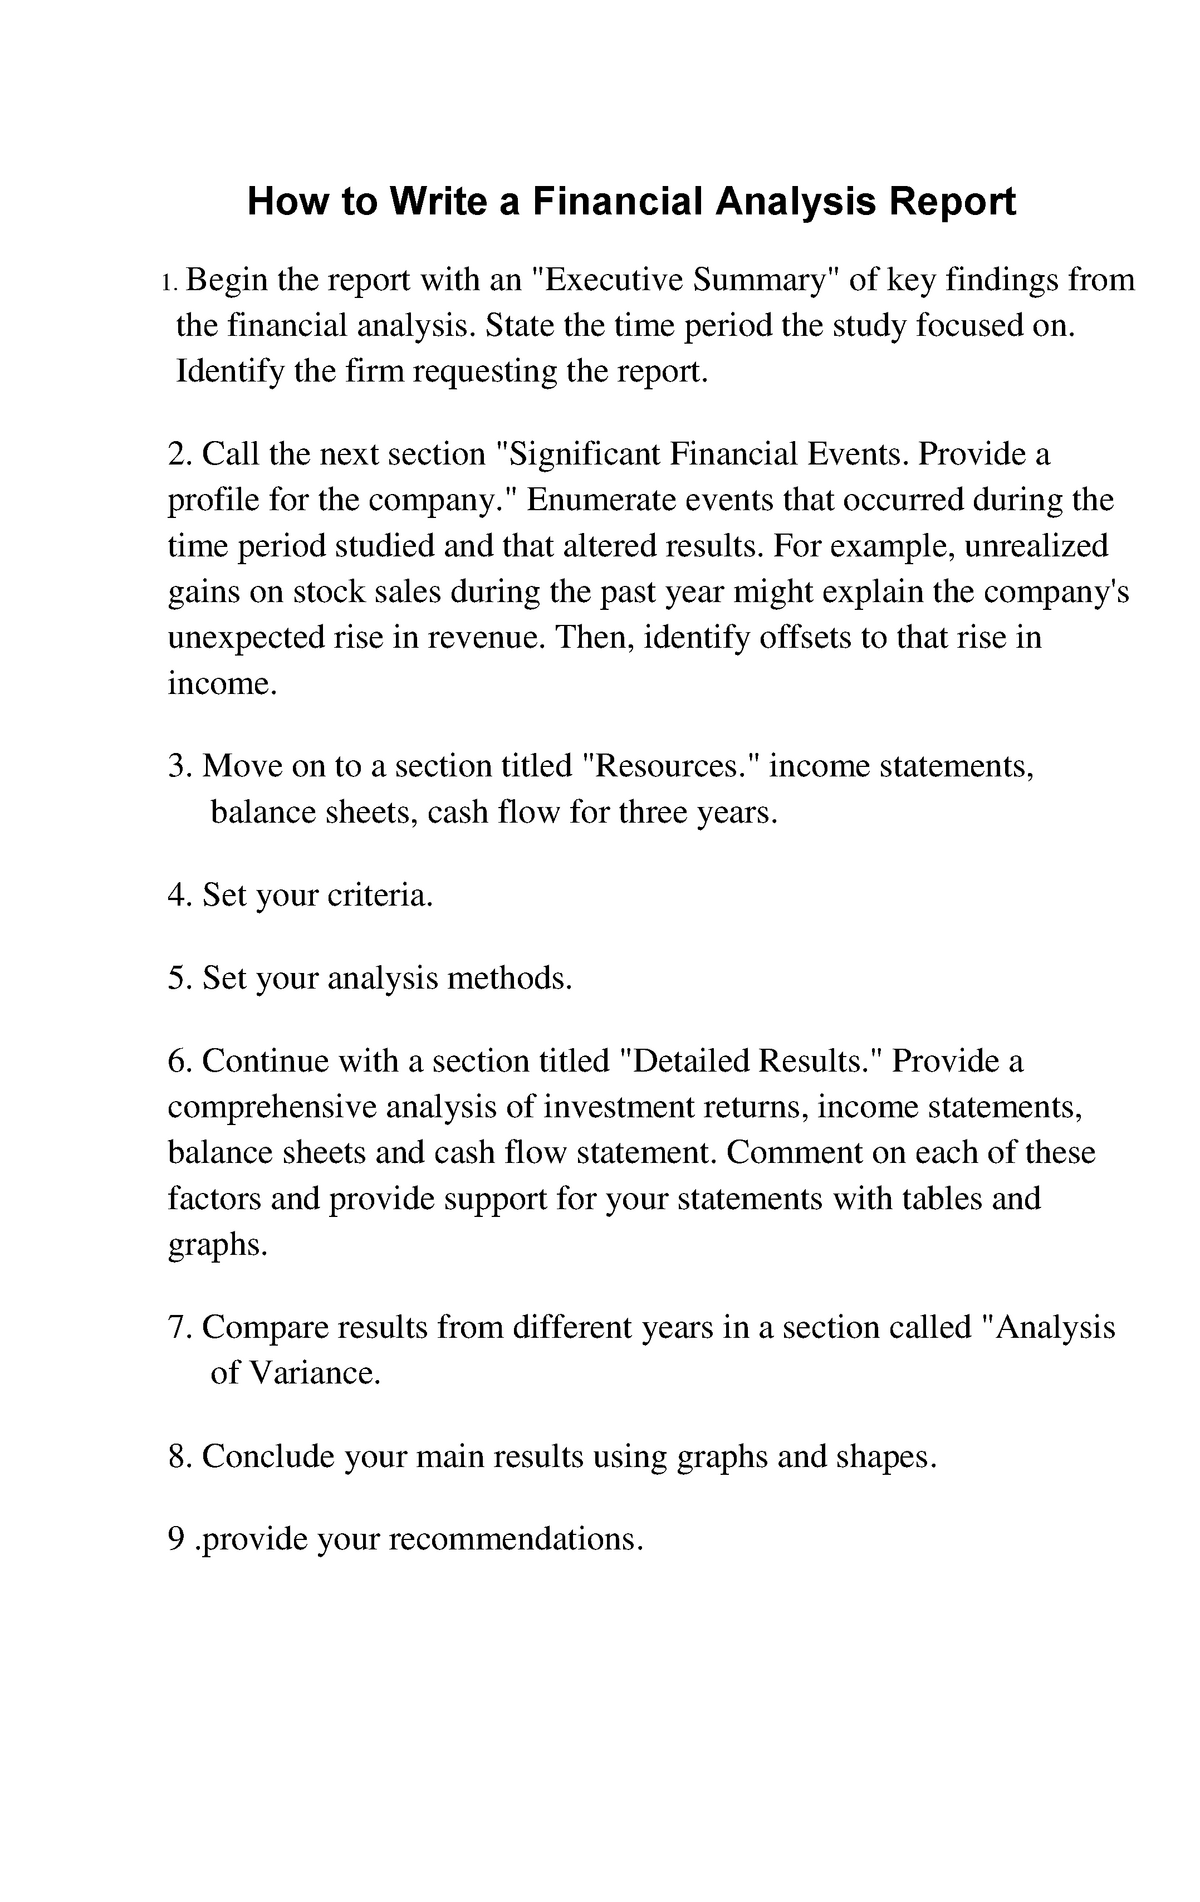 Financial Statements Examples – Amazon Case Study